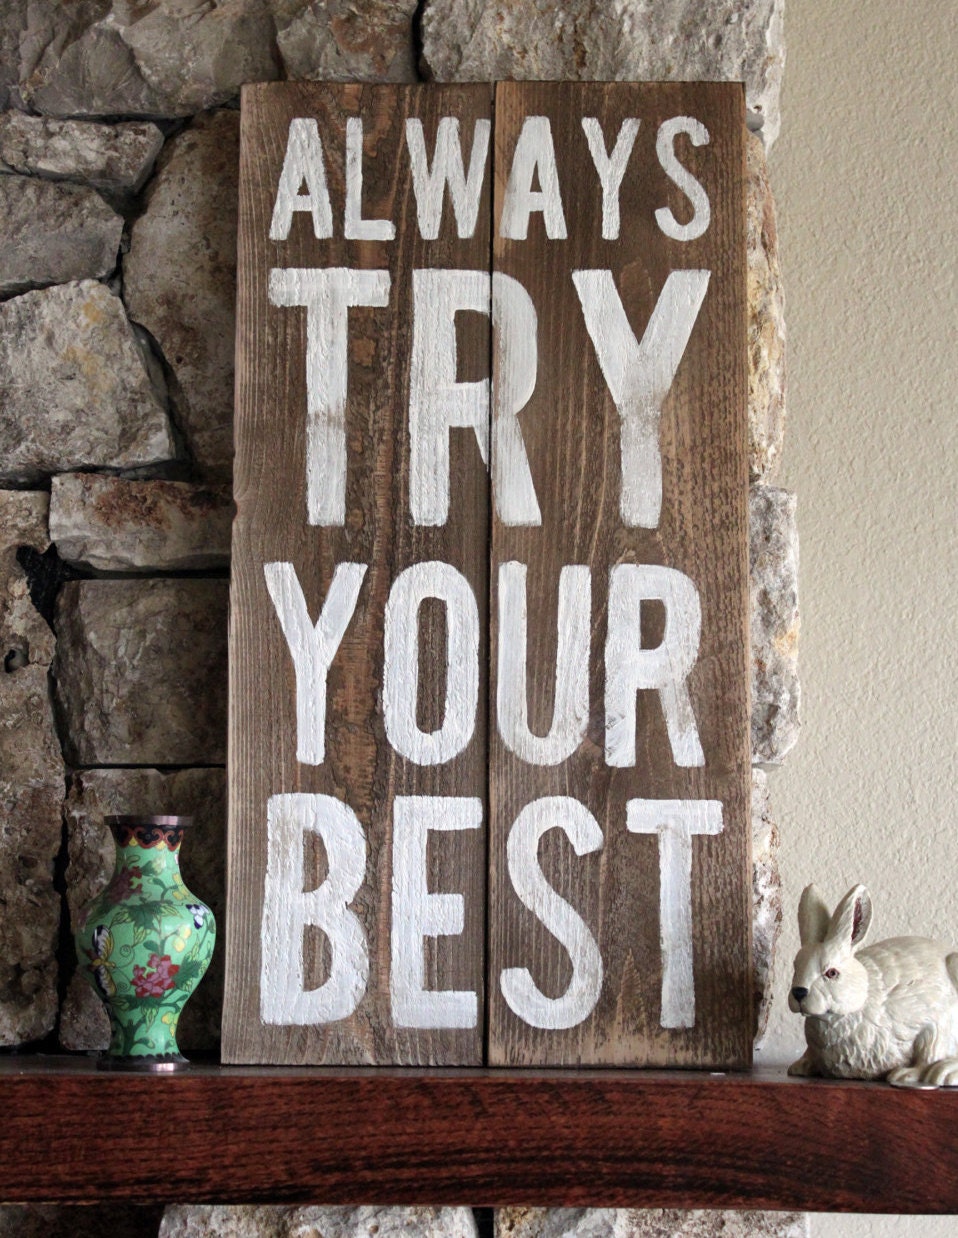 You are always at your best. Do you best. Do your best. The best картинки. Try your best.